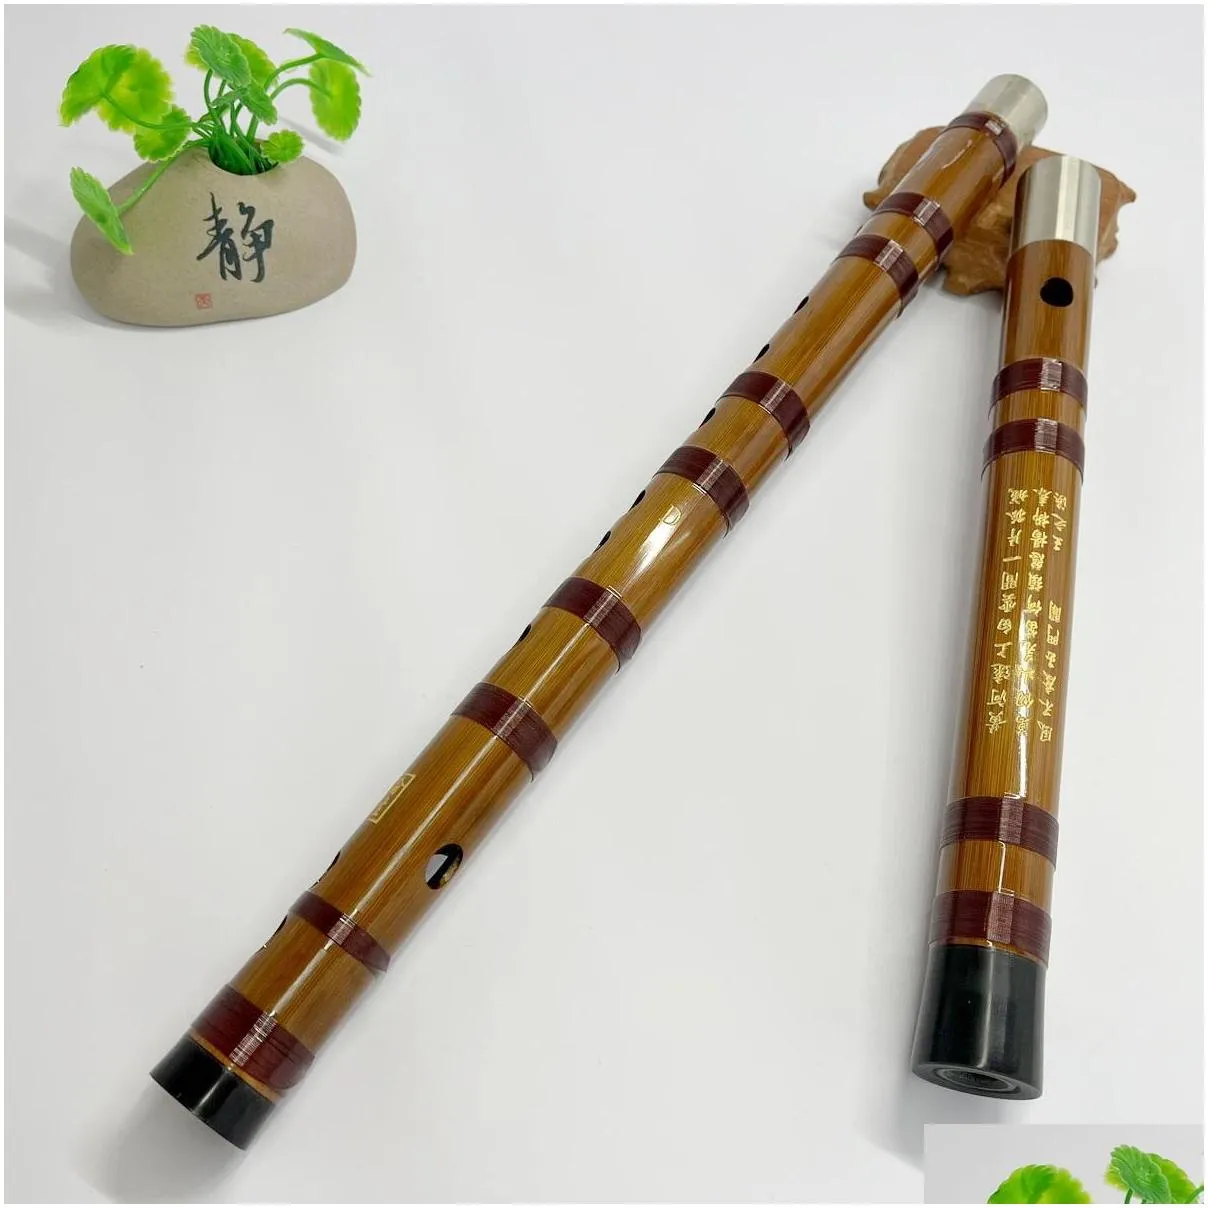 Drums & Percussion A001 Basic Professional Dizi Flute Cost Price Suitalbe To Beginner Drop Delivery Toys Gifts Novelty Gag Toys Musica Dhikc